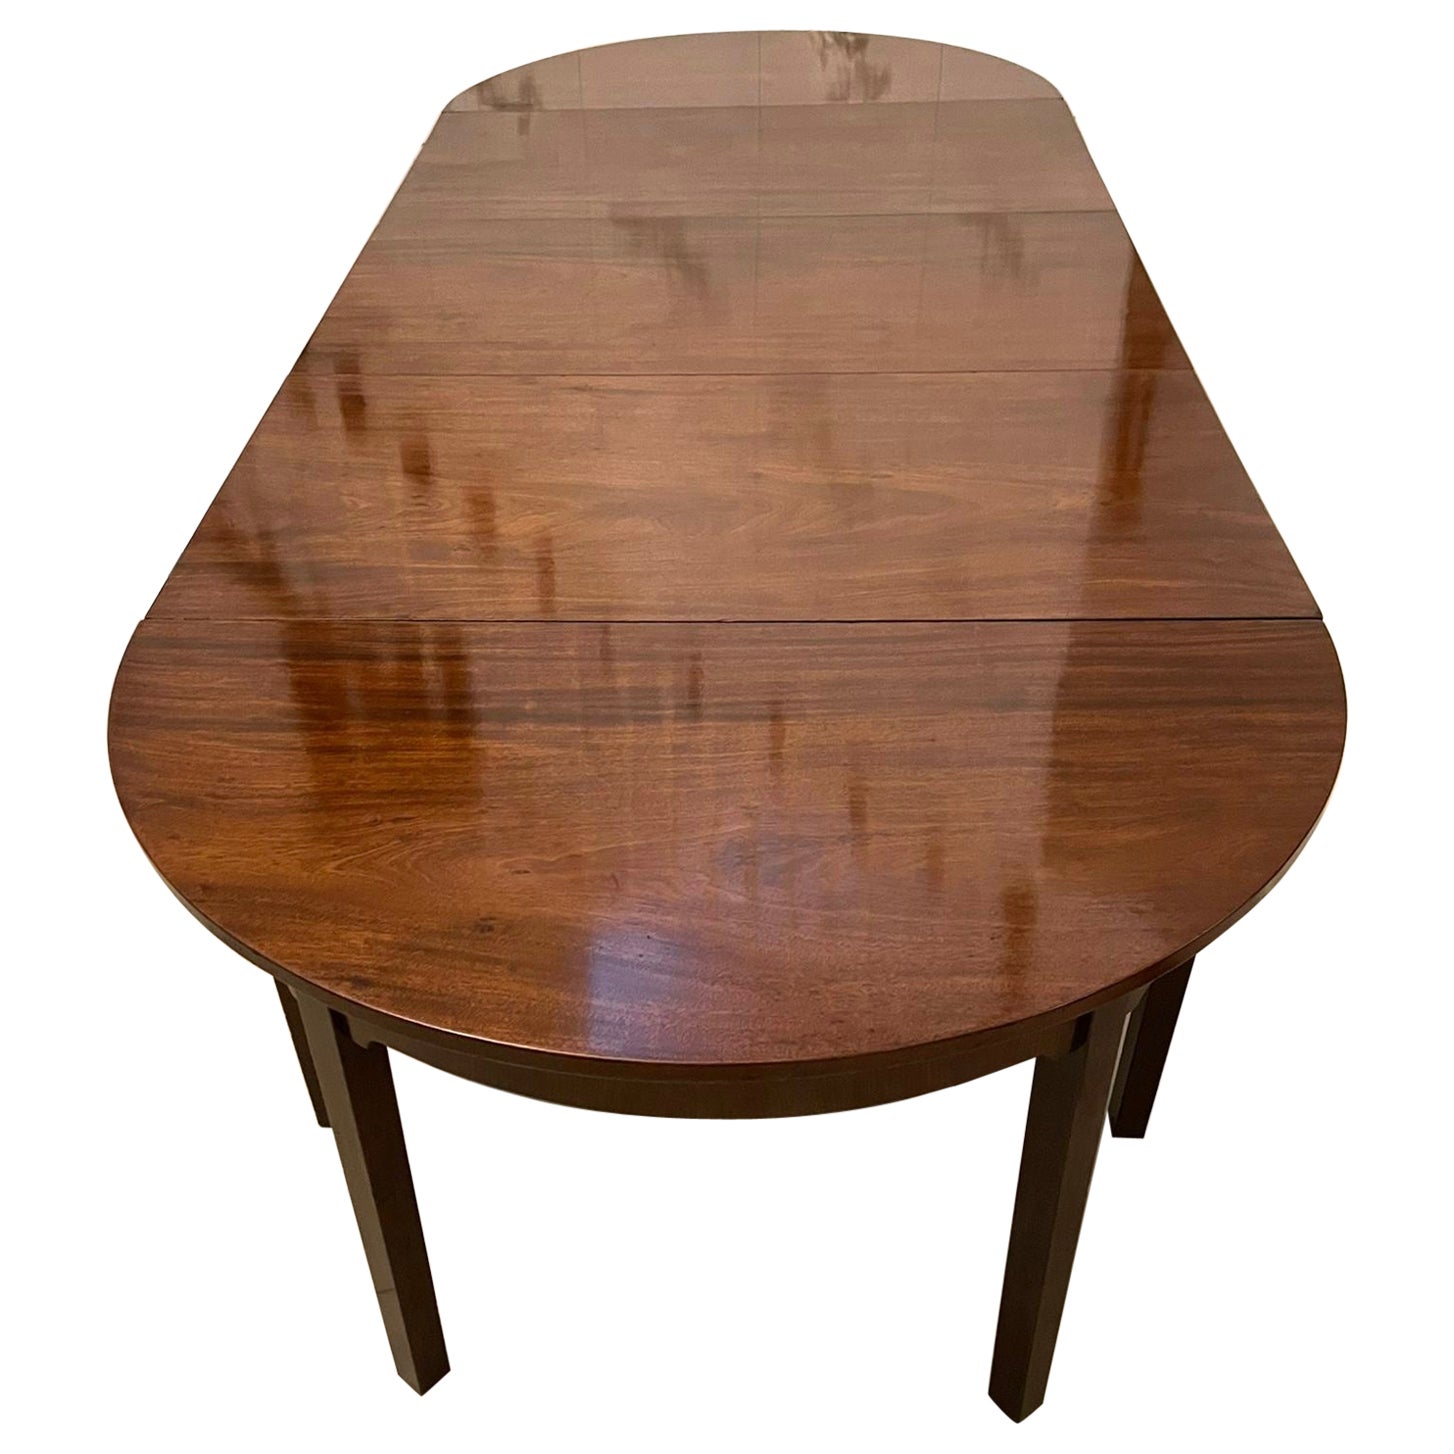 Outstanding Quality Large Antique Figured Mahogany Metamorphic Dining Table For Sale